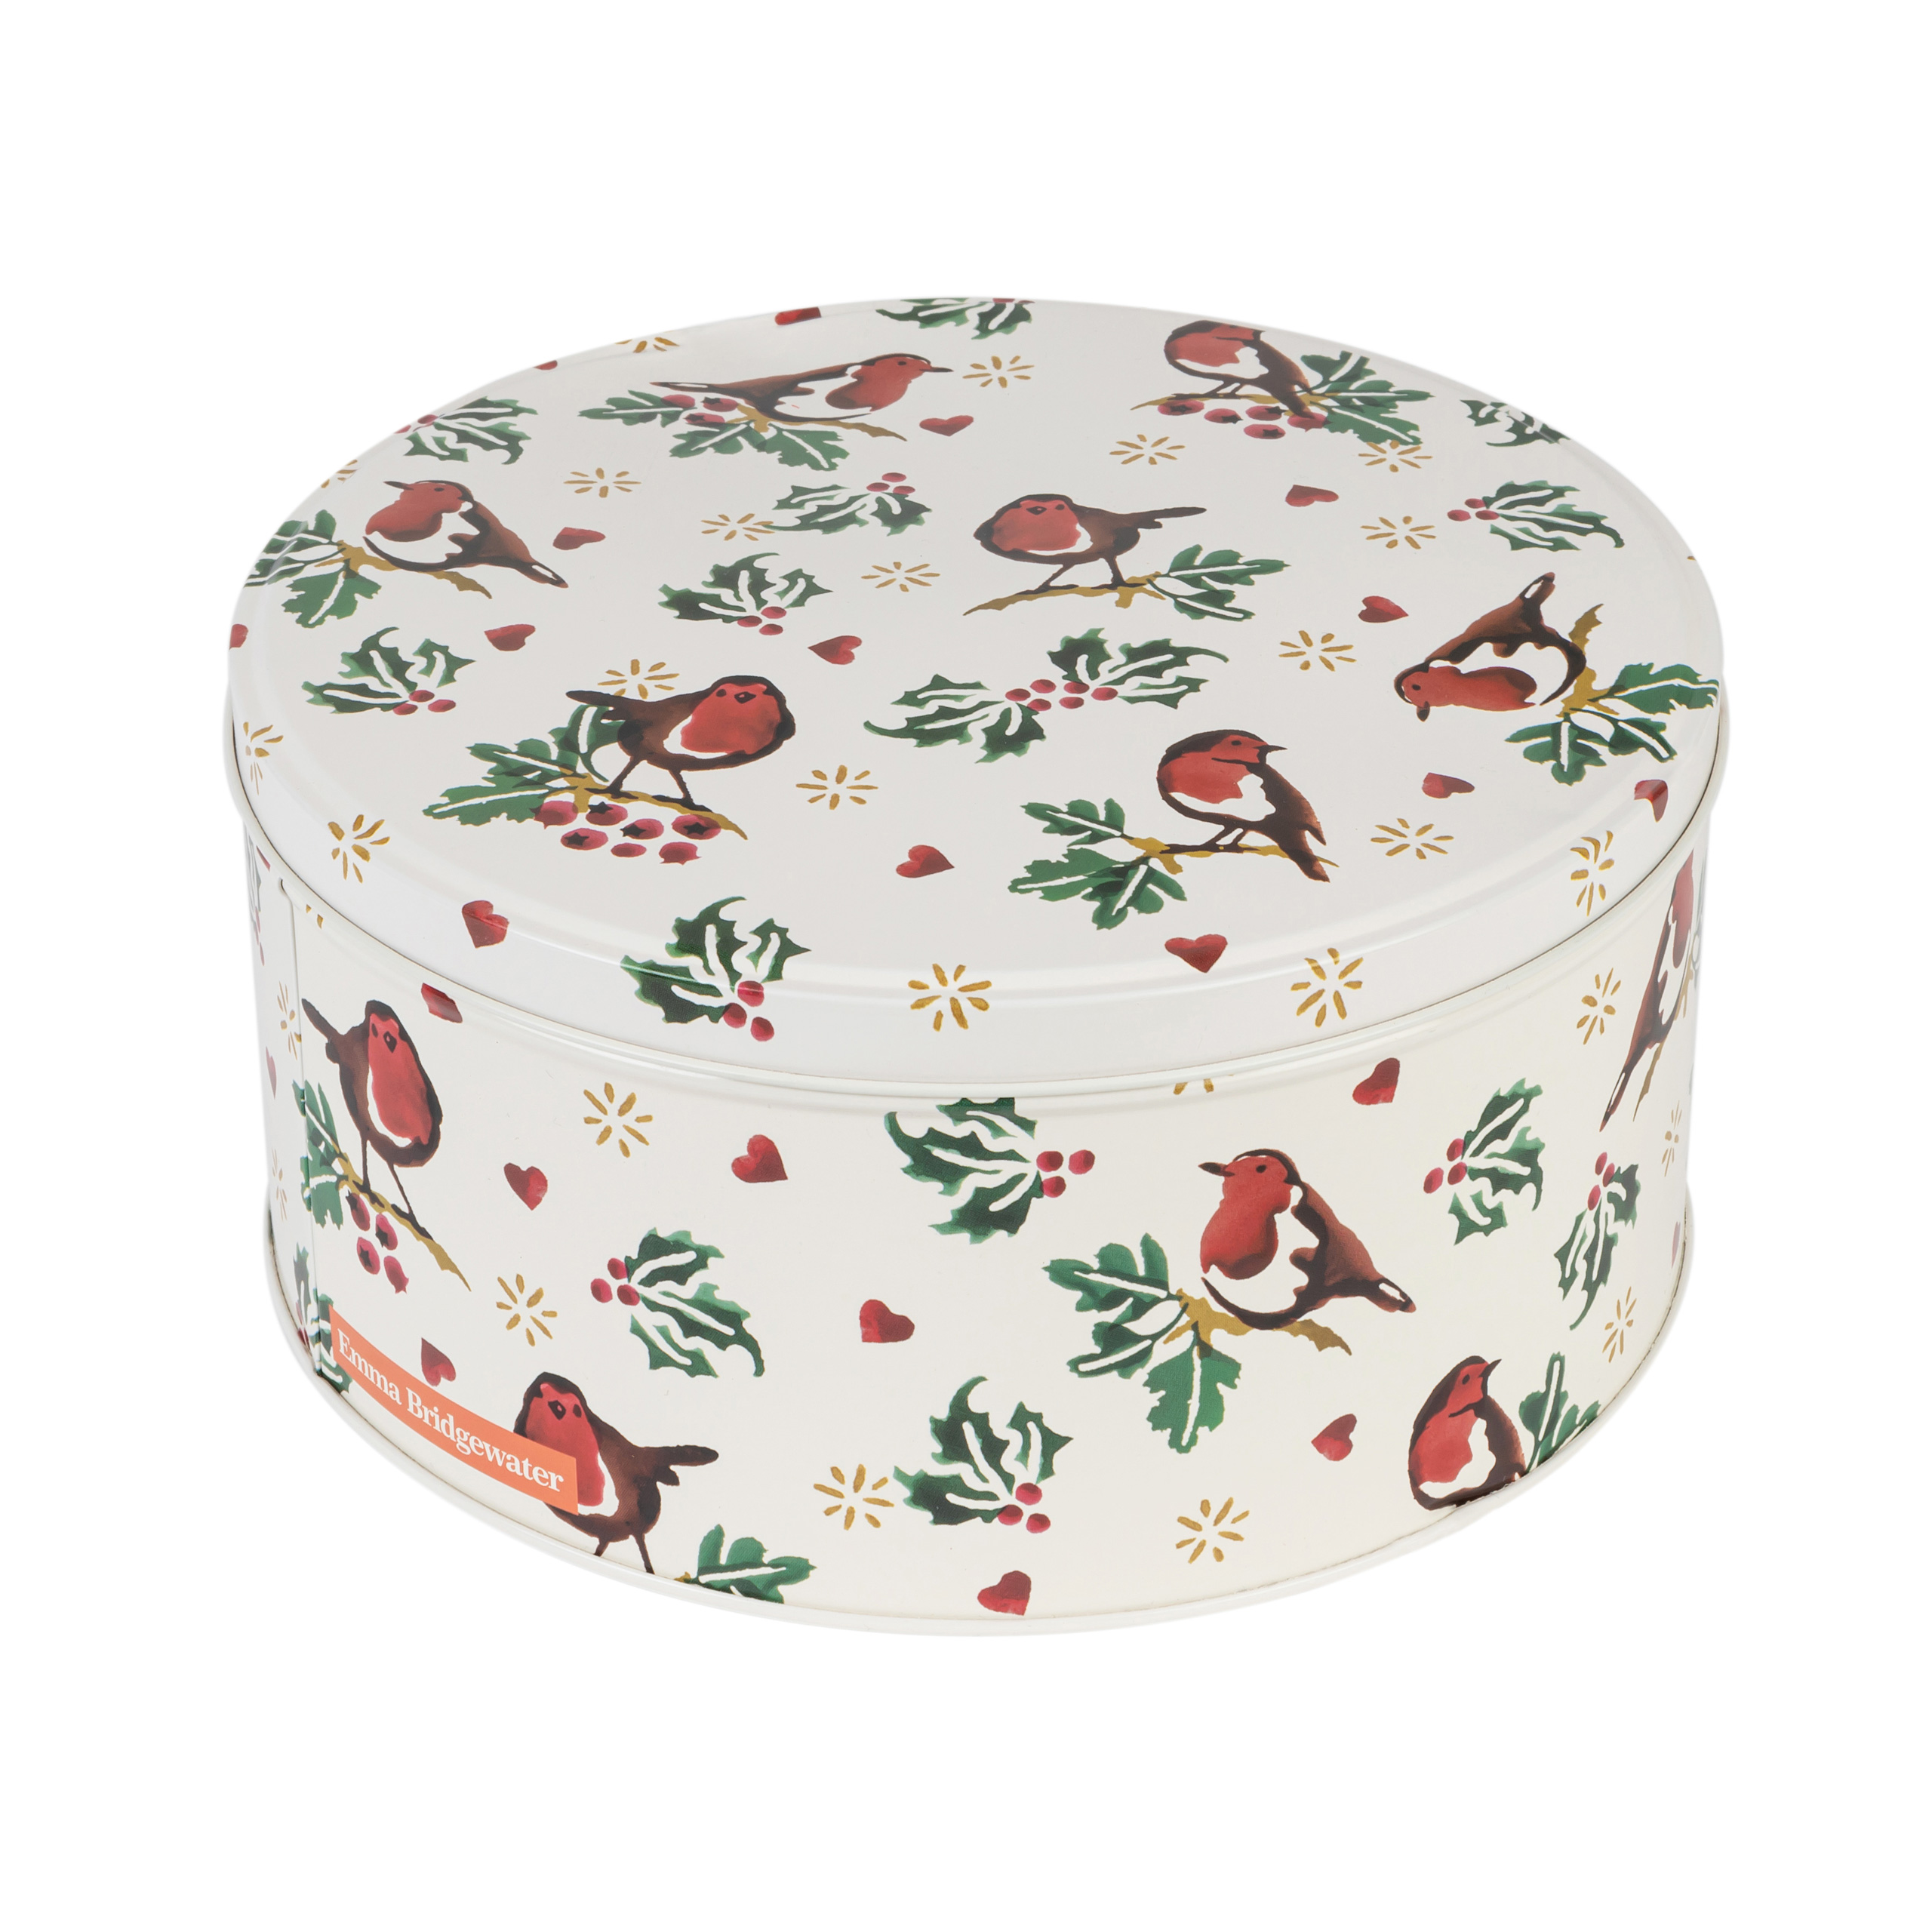 Robin Square Biscuit Tin